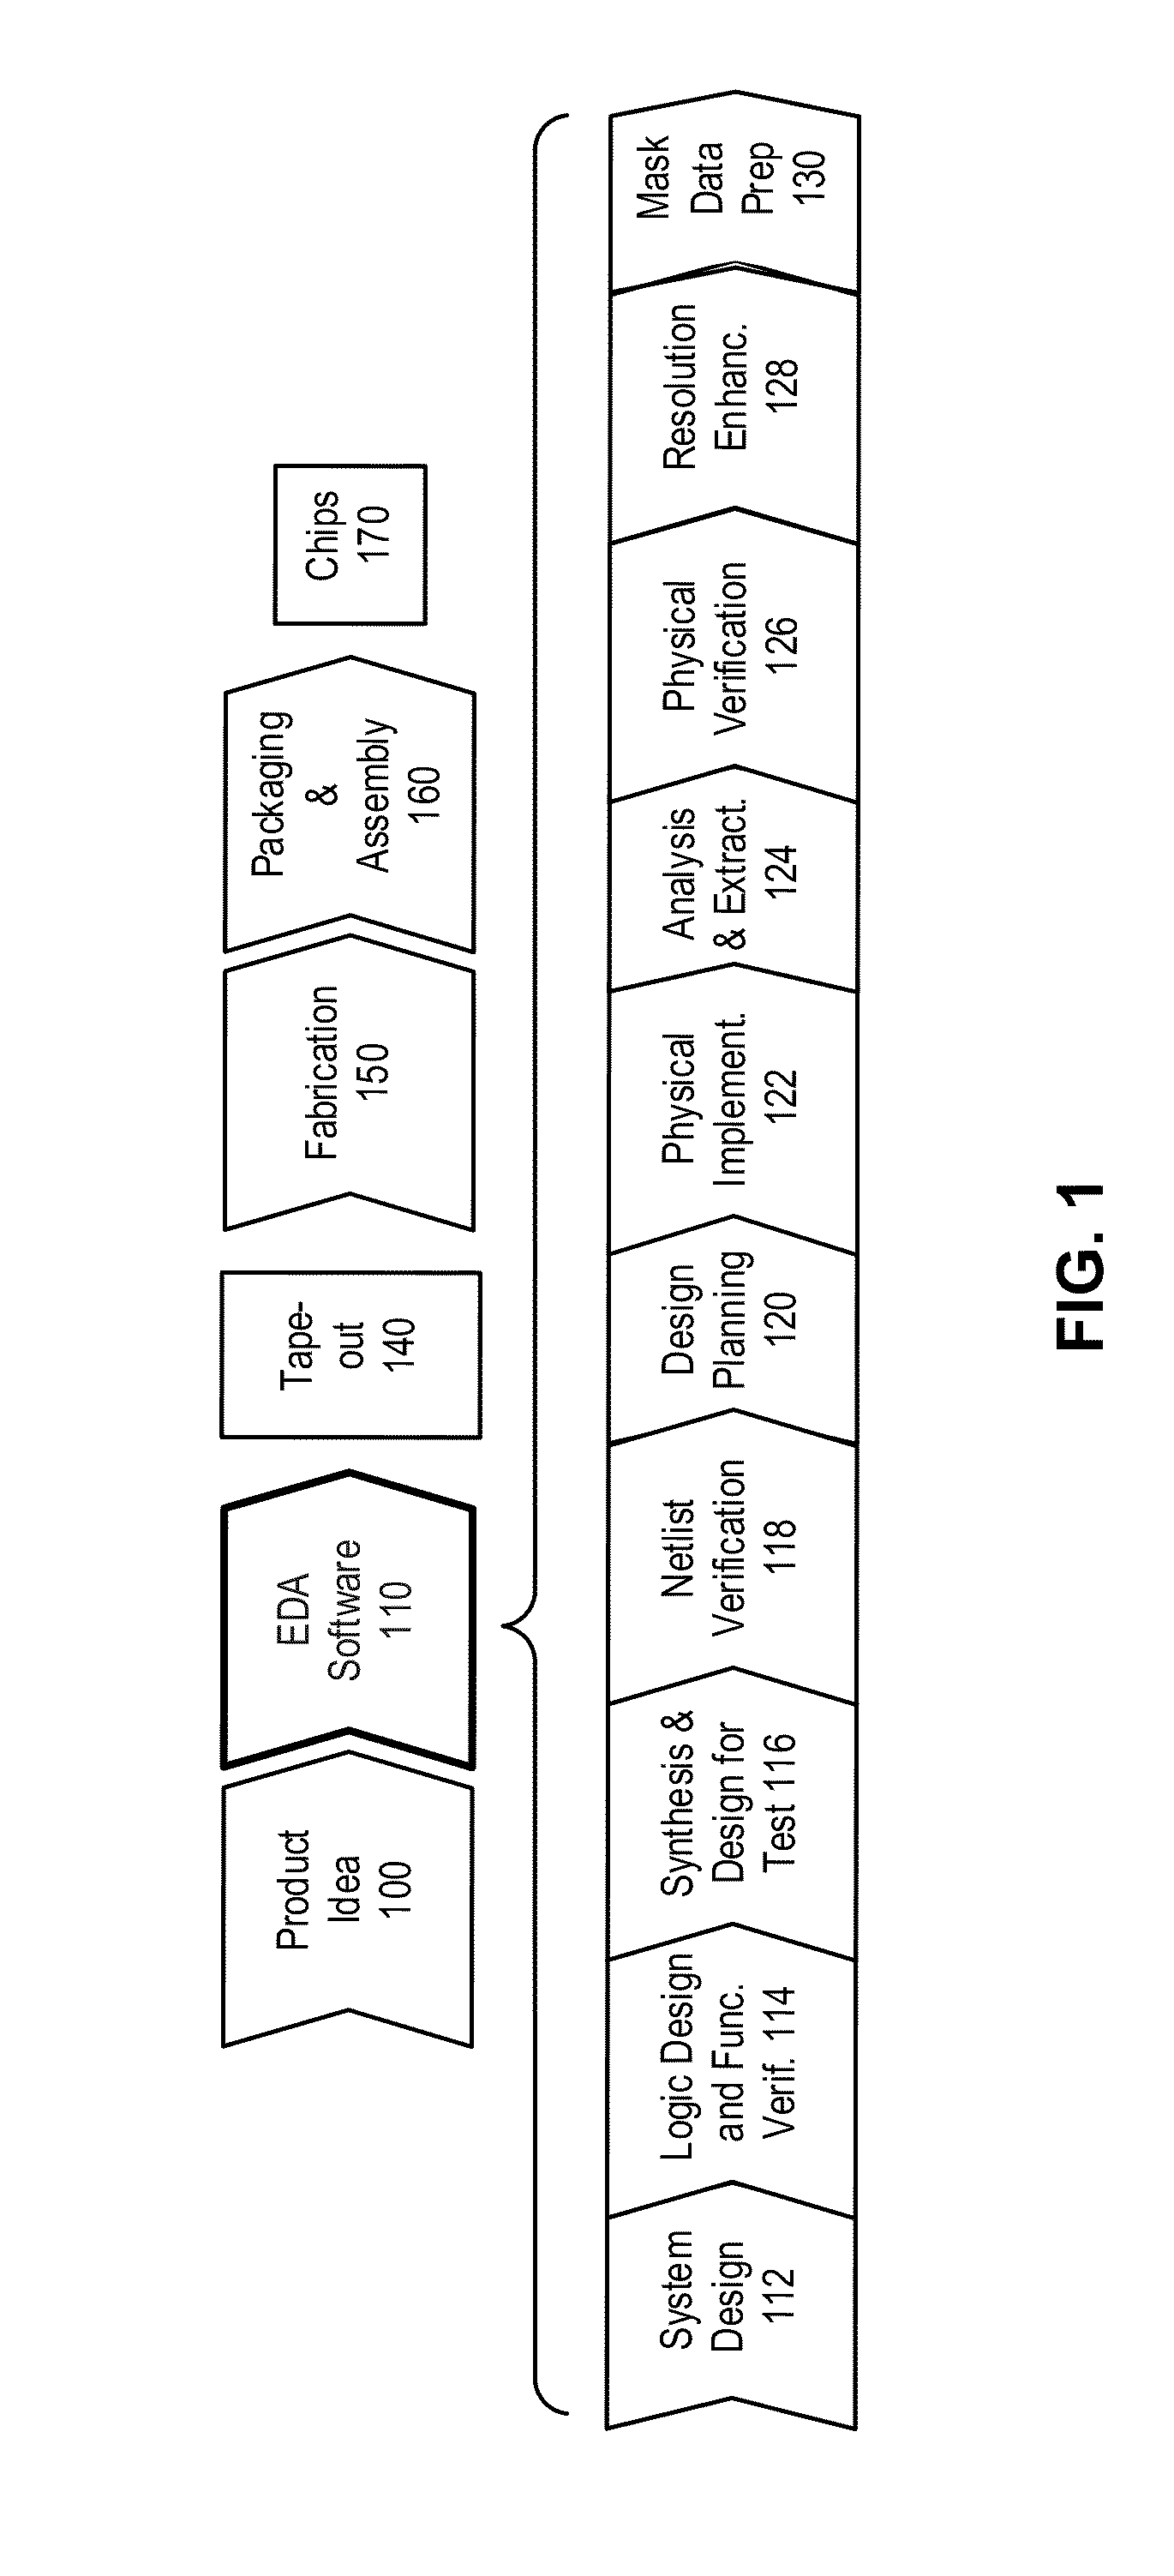 Method and apparatus for satisfying routing rules during circuit design